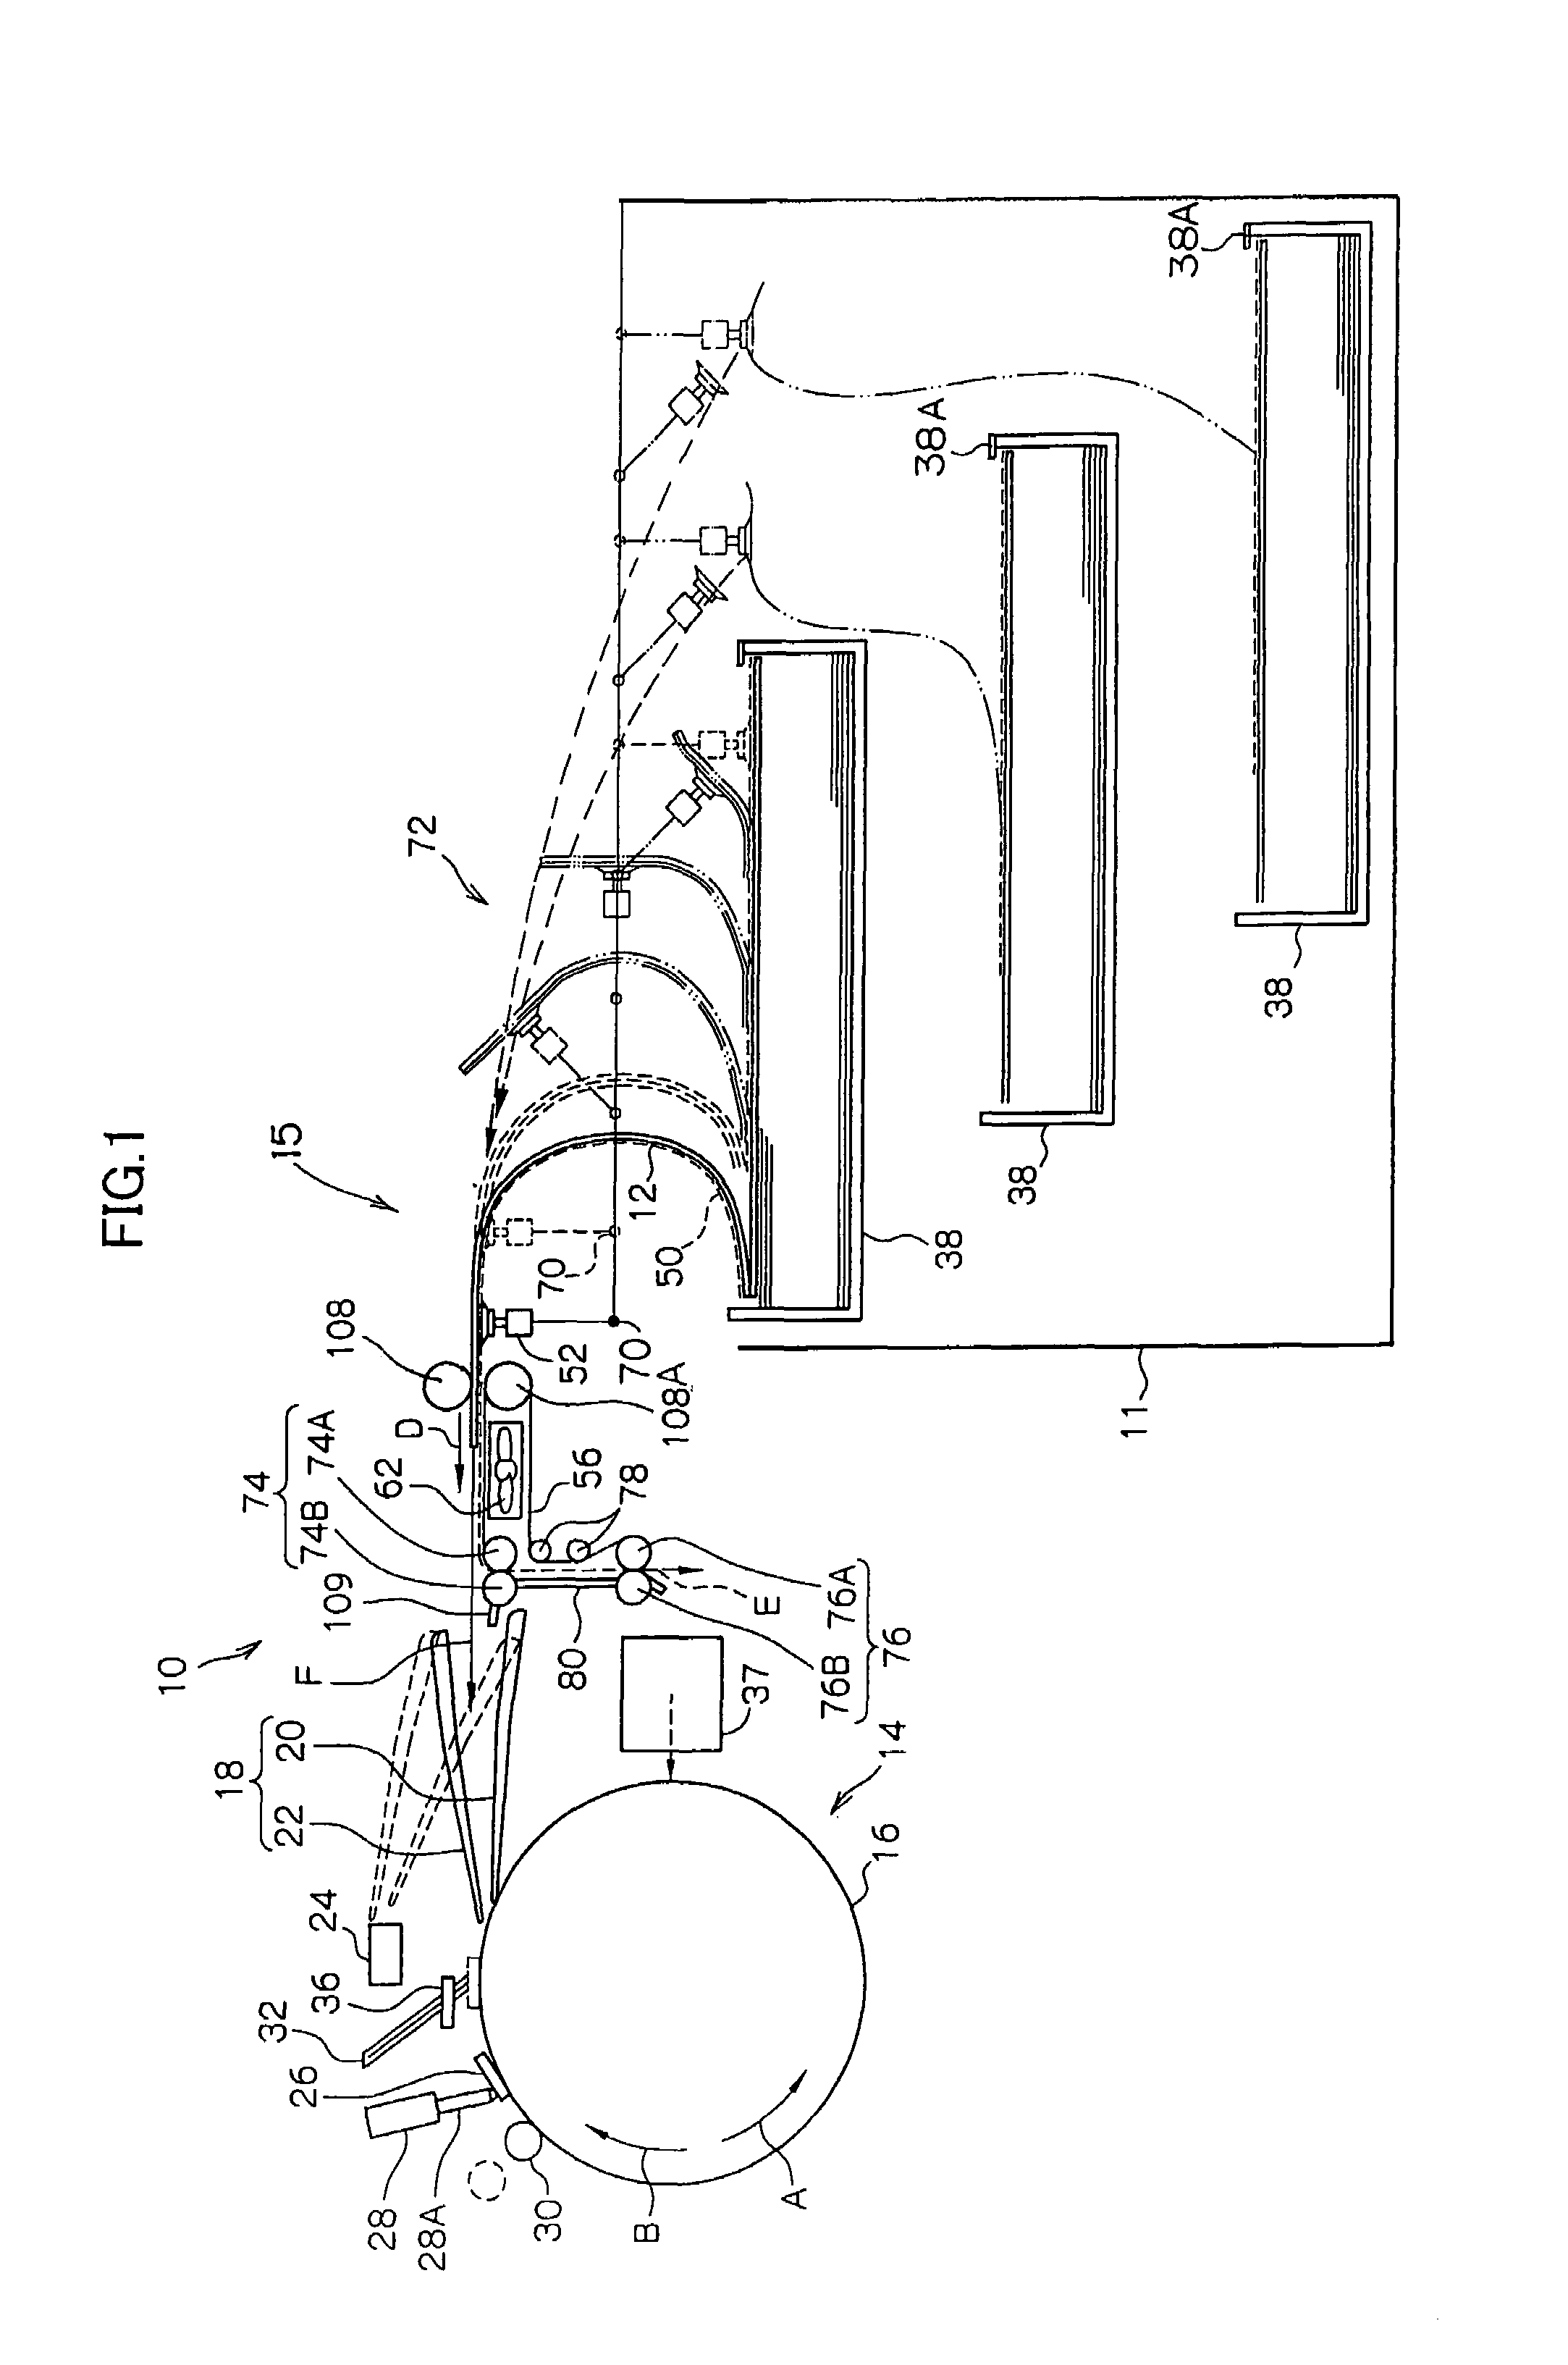 Image recording material separating/removing device